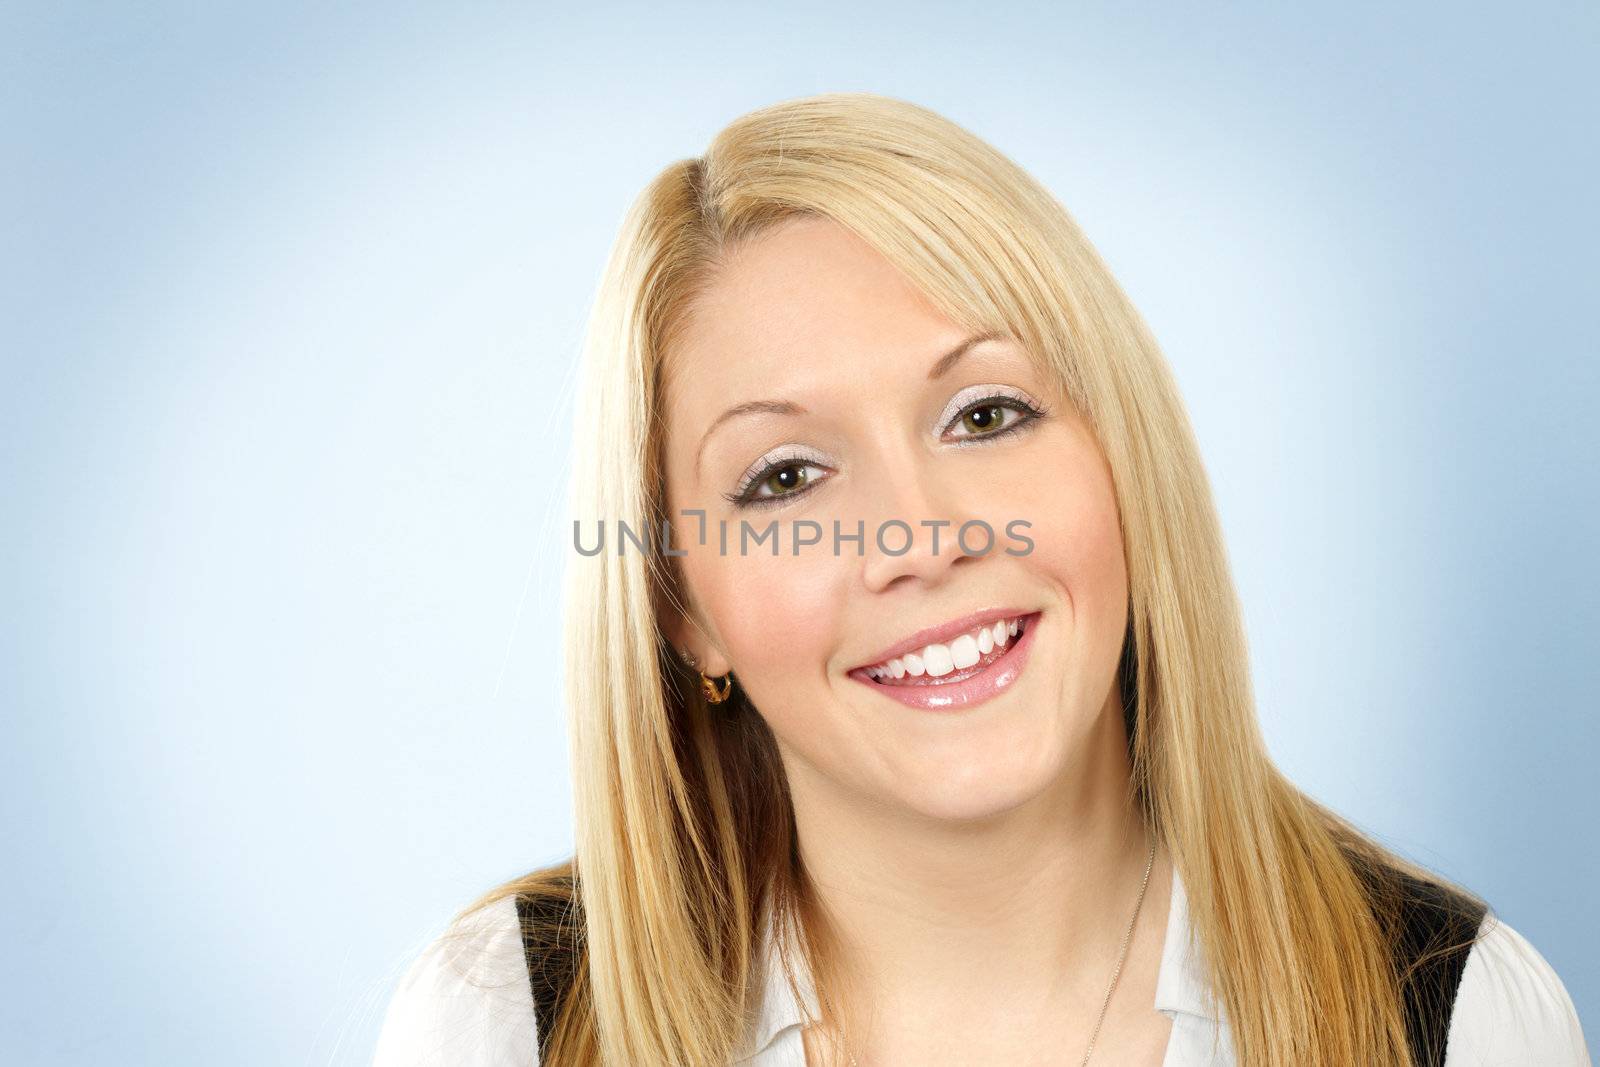 An cute friendly blonde girl smiling for the camera.
